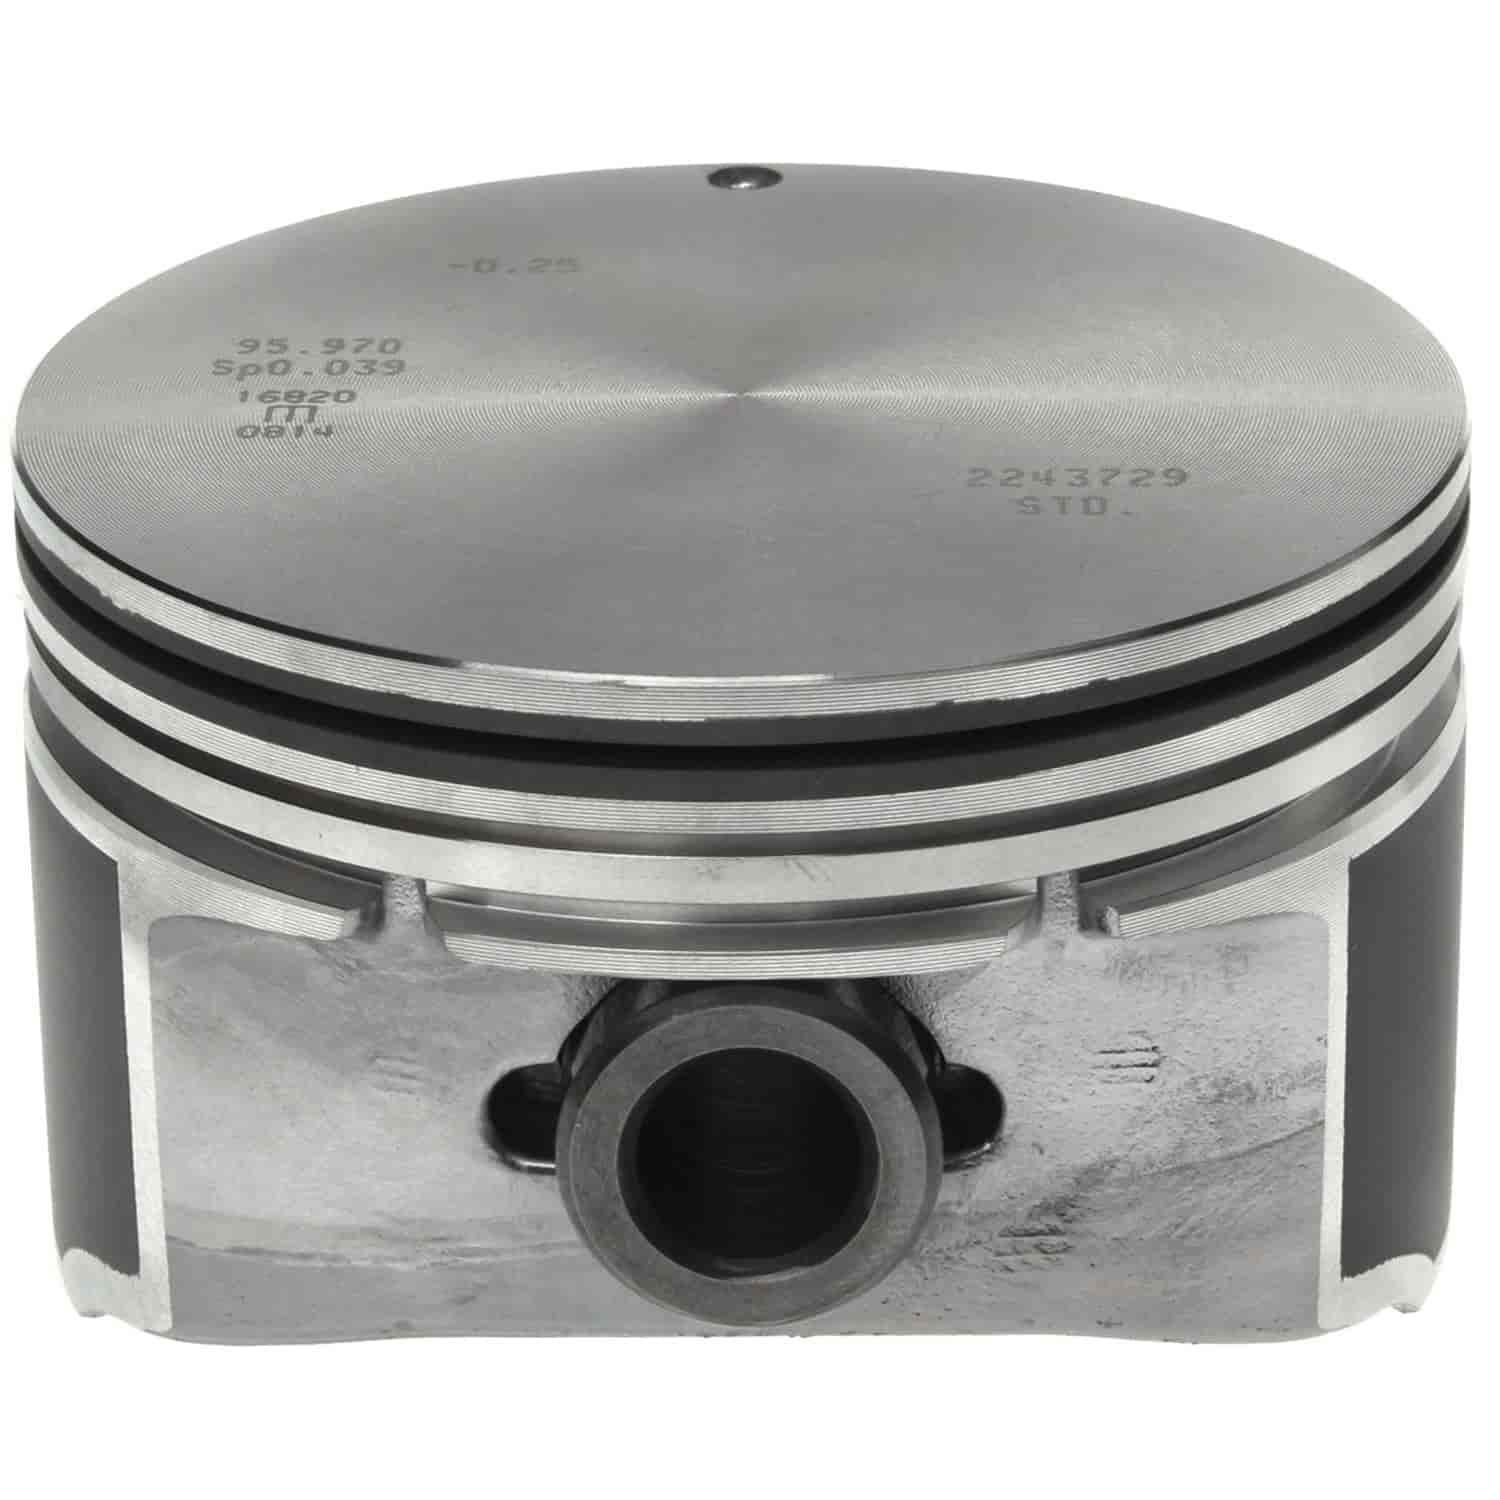 Piston Set 2005-2009 Chevy LS V8 4.8/5.3L with 3.810"/96.75mm Bore (+.75mm)